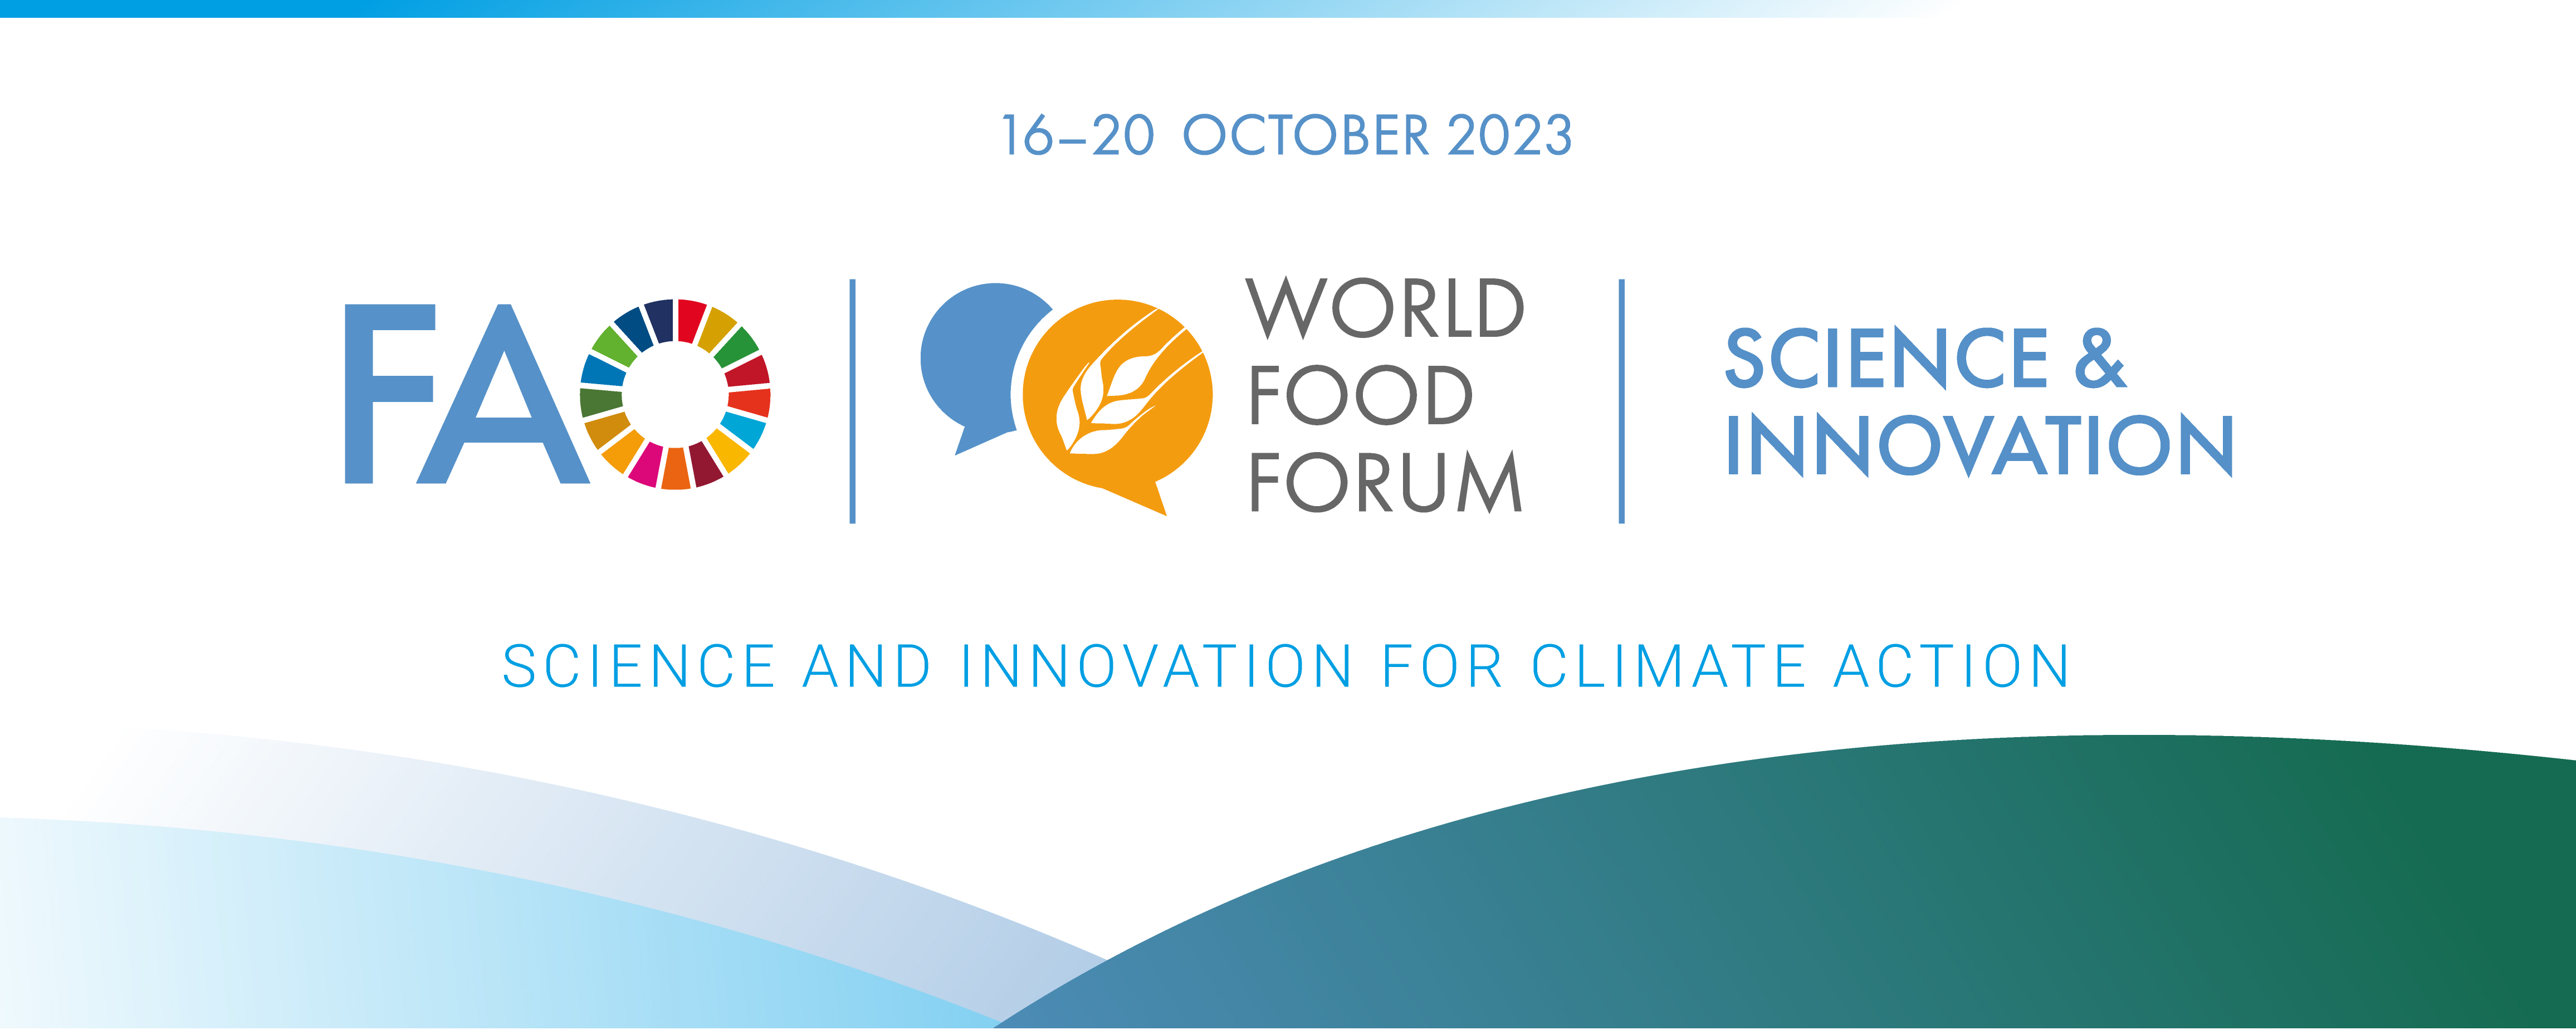 2023 FAO Science And Innovation Forum: Science and Innovation for Climate Action